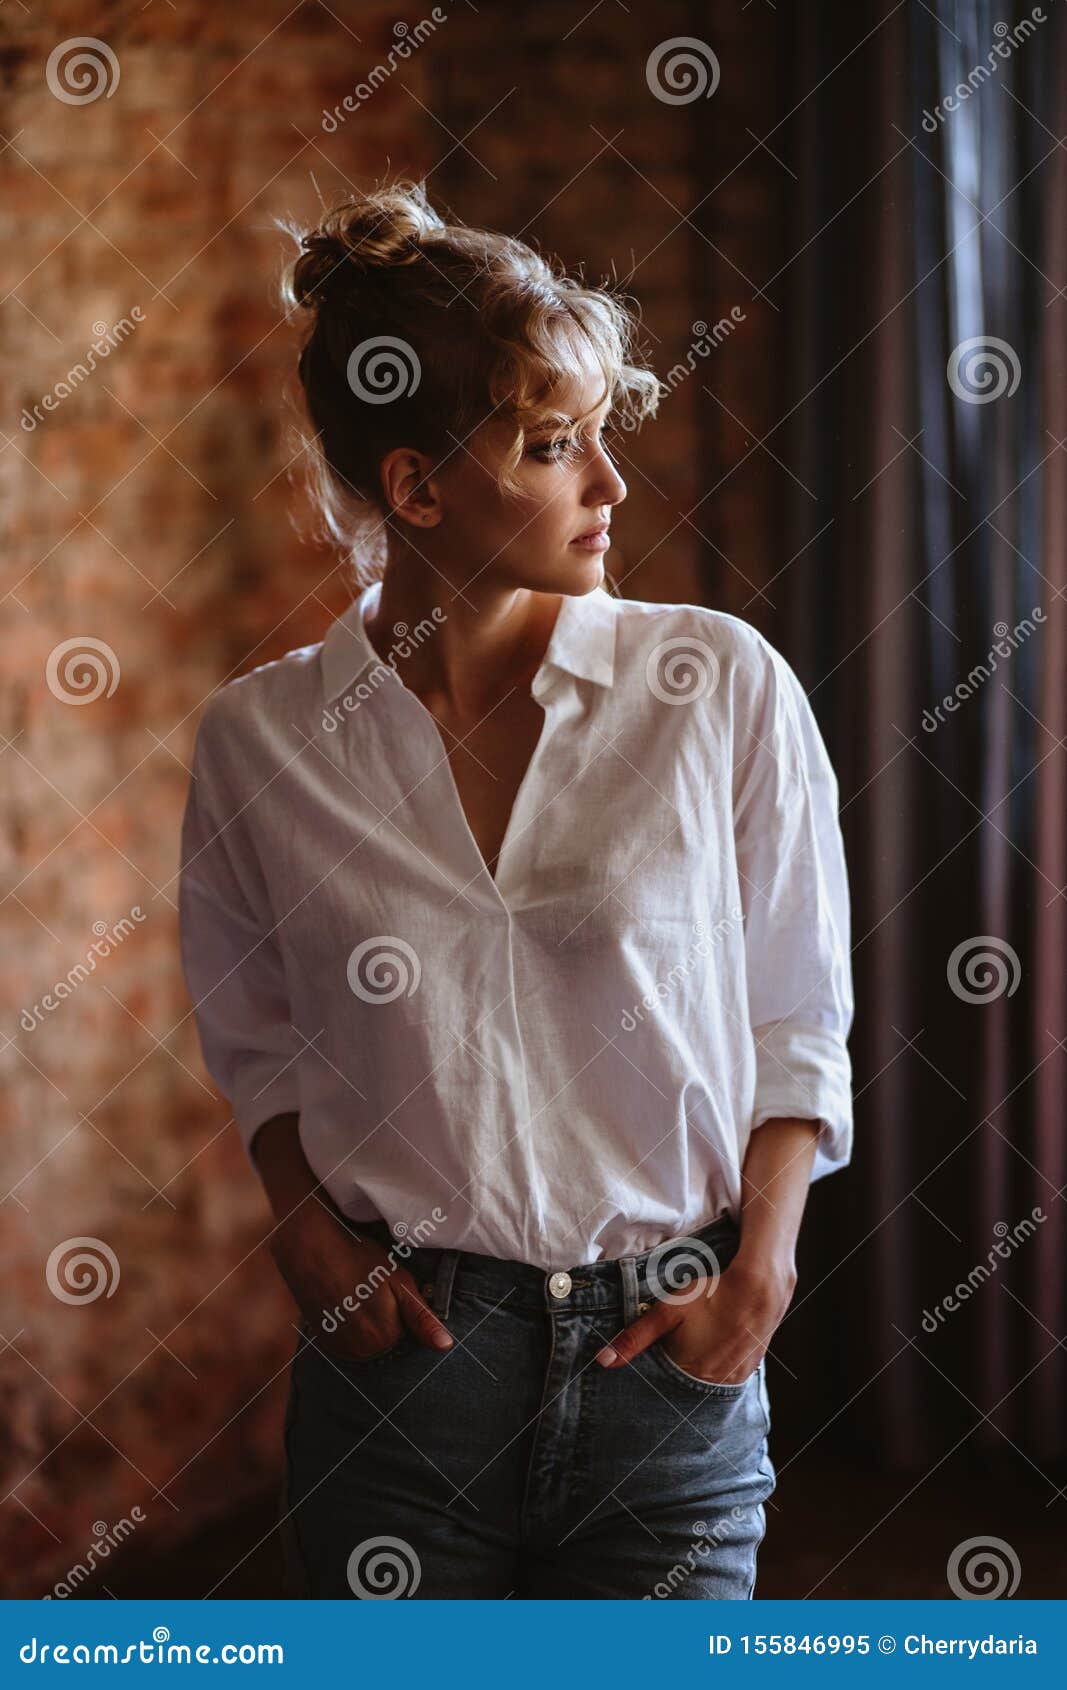 Young Blonde Woman in a Casual White Shirt and Jeans in a Loft Interior,  Close Up Fashion Portrait Stock Image - Image of girl, female: 155846995